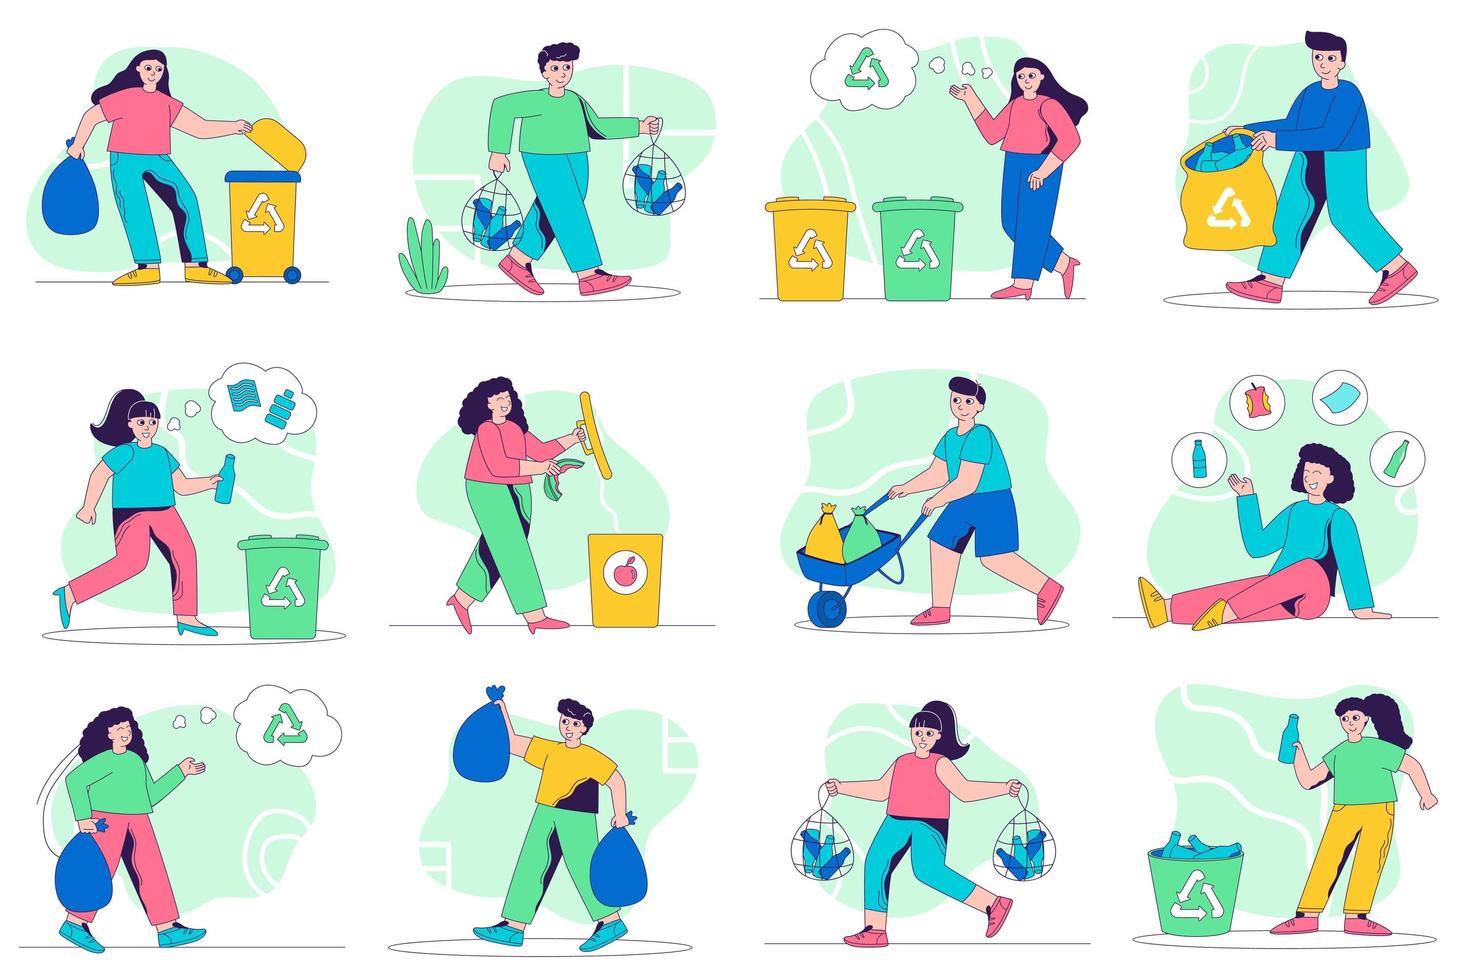 Waste management concept isolated person situations. Collection of scenes with people collect garbage, sort different types of trash at bins, recycling. Mega set. Vector illustration in flat design